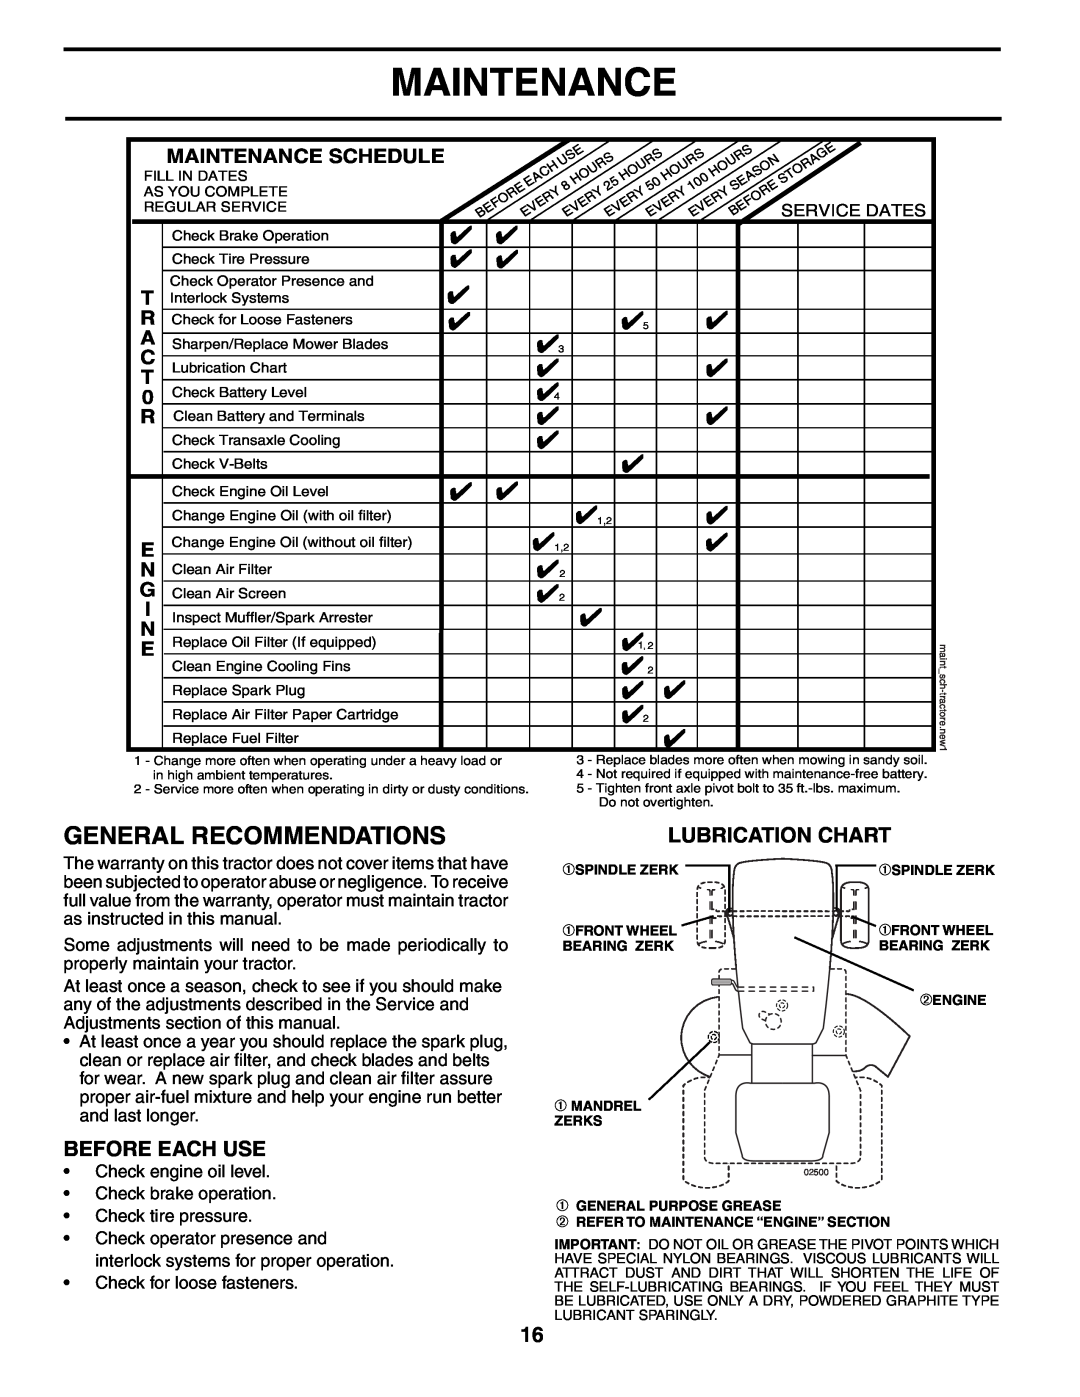 Poulan 187009 owner manual General Recommendations, Lubrication Chart, Before Each Use, Maintenance Schedule 